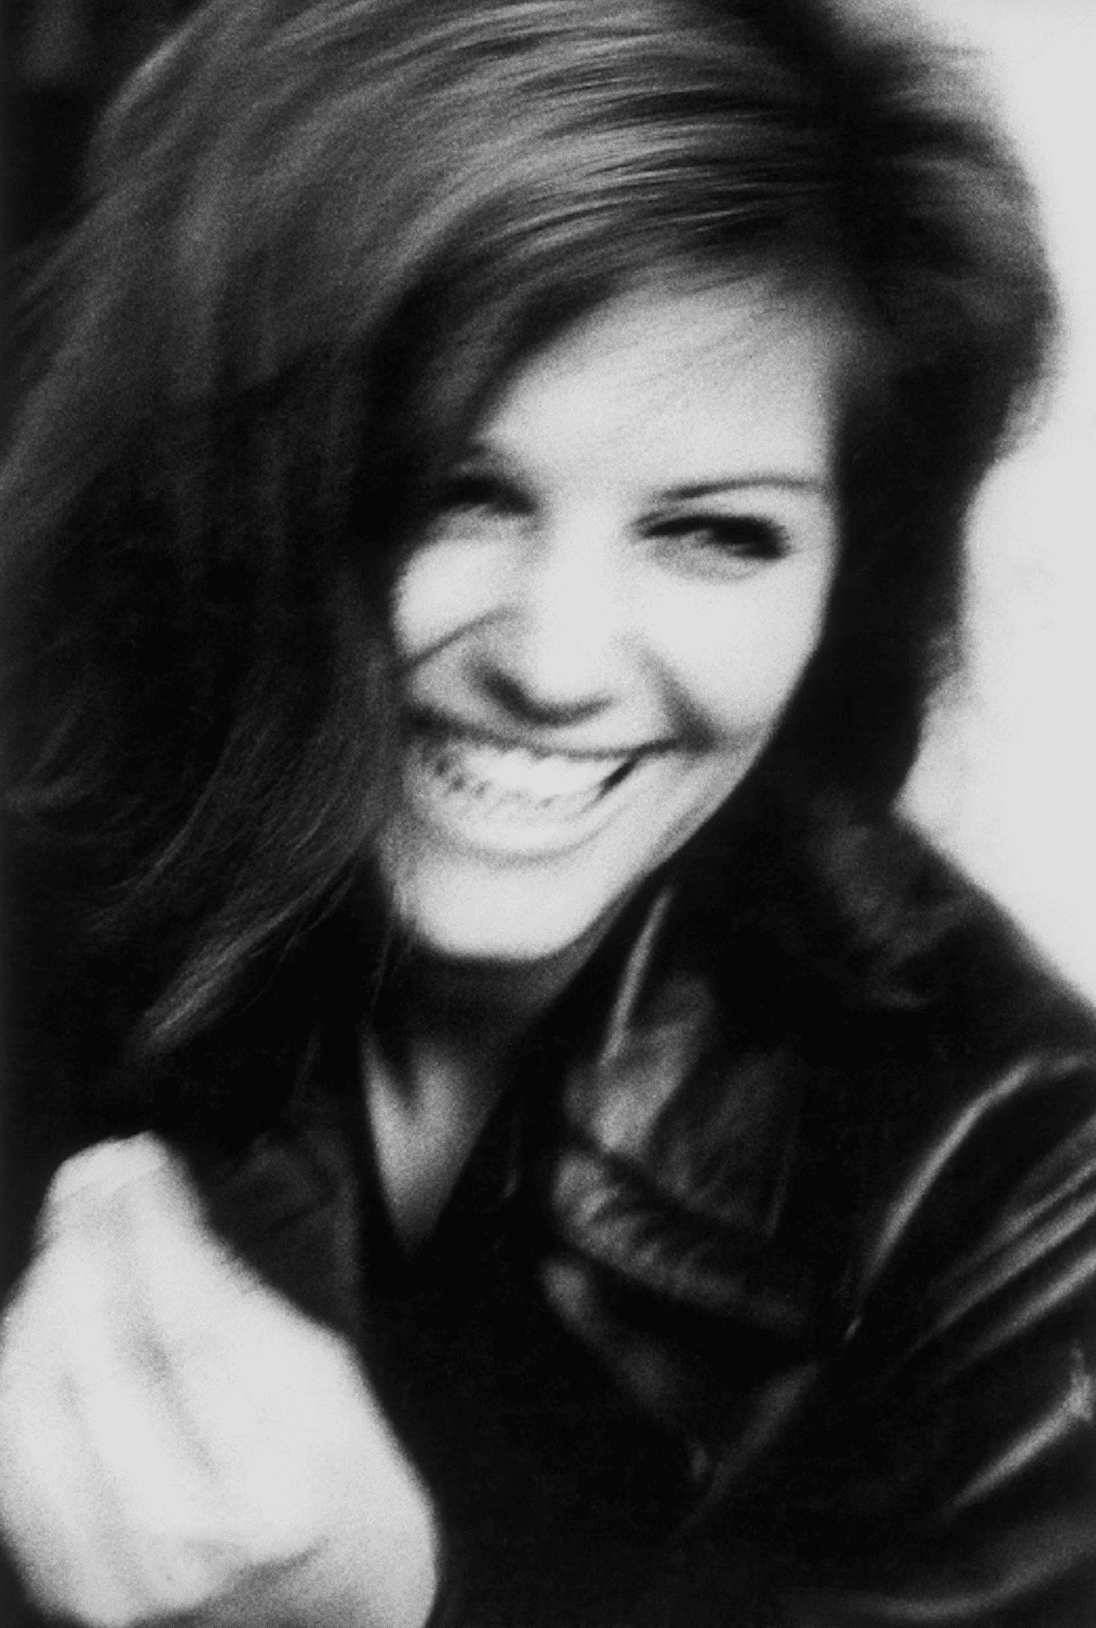 Claudia Cardinale, 'About Town', 1962 Terence Donovan